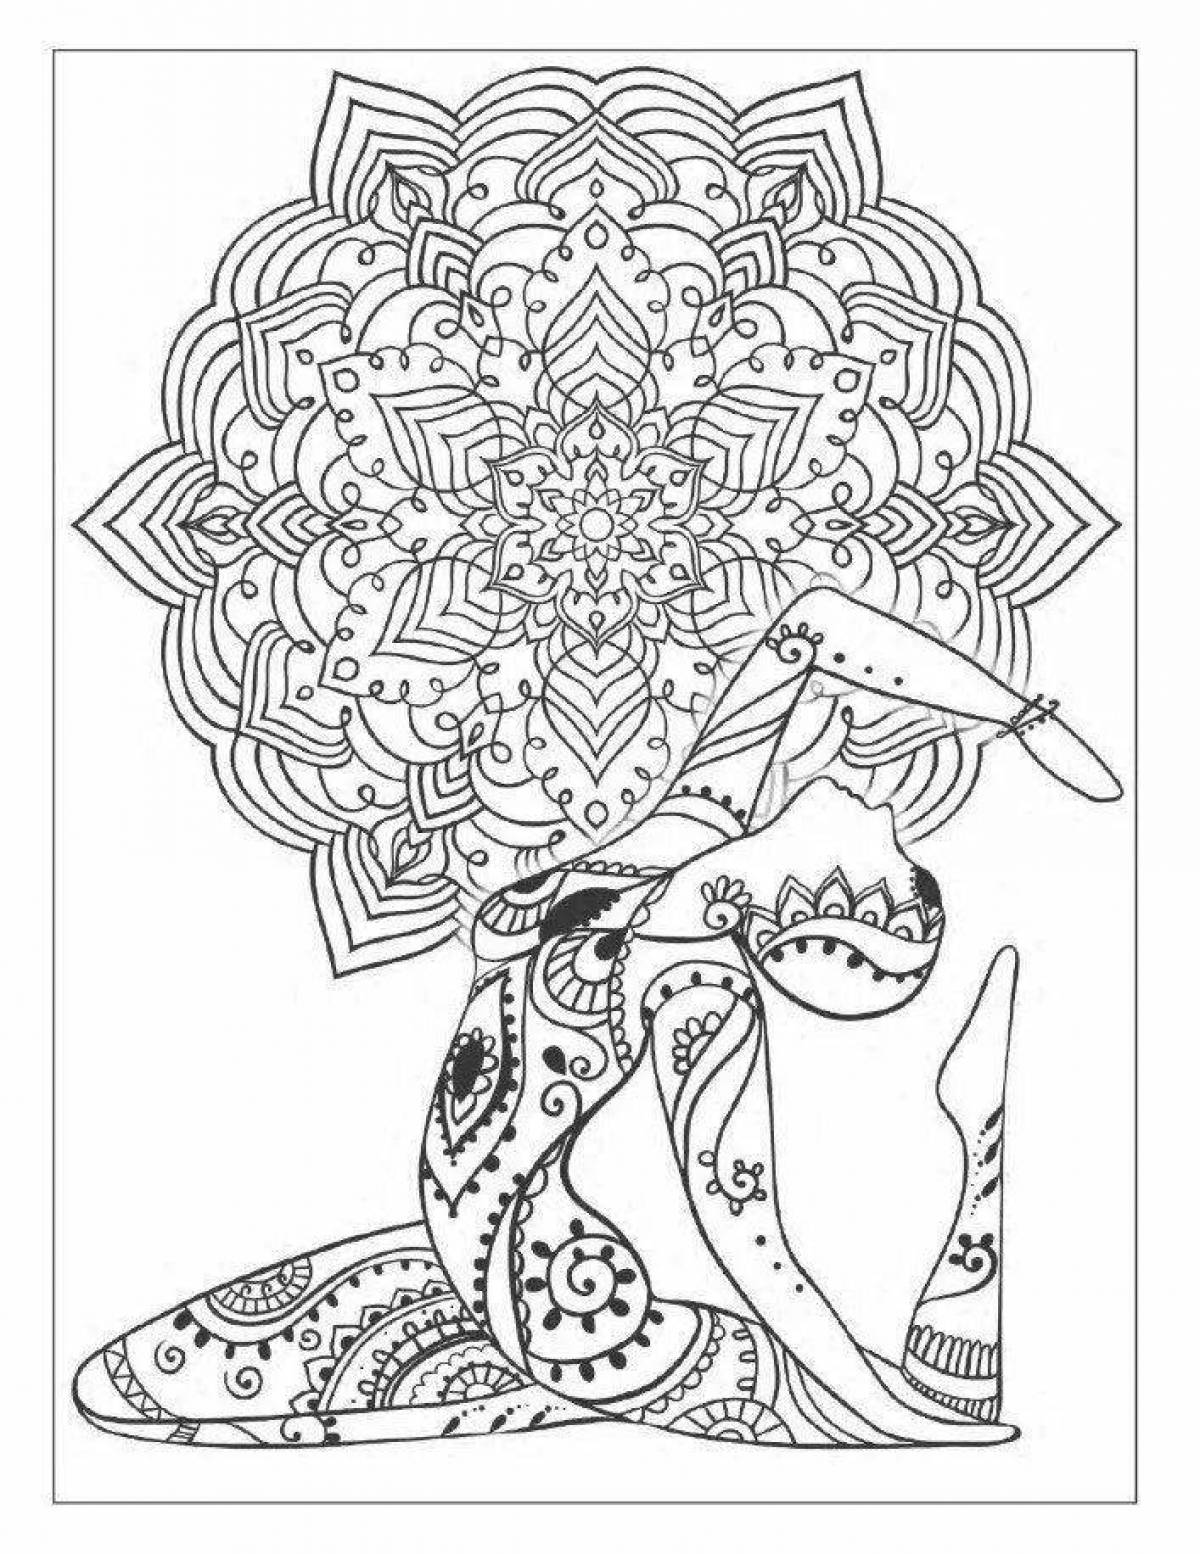 Exciting coloring meditation page